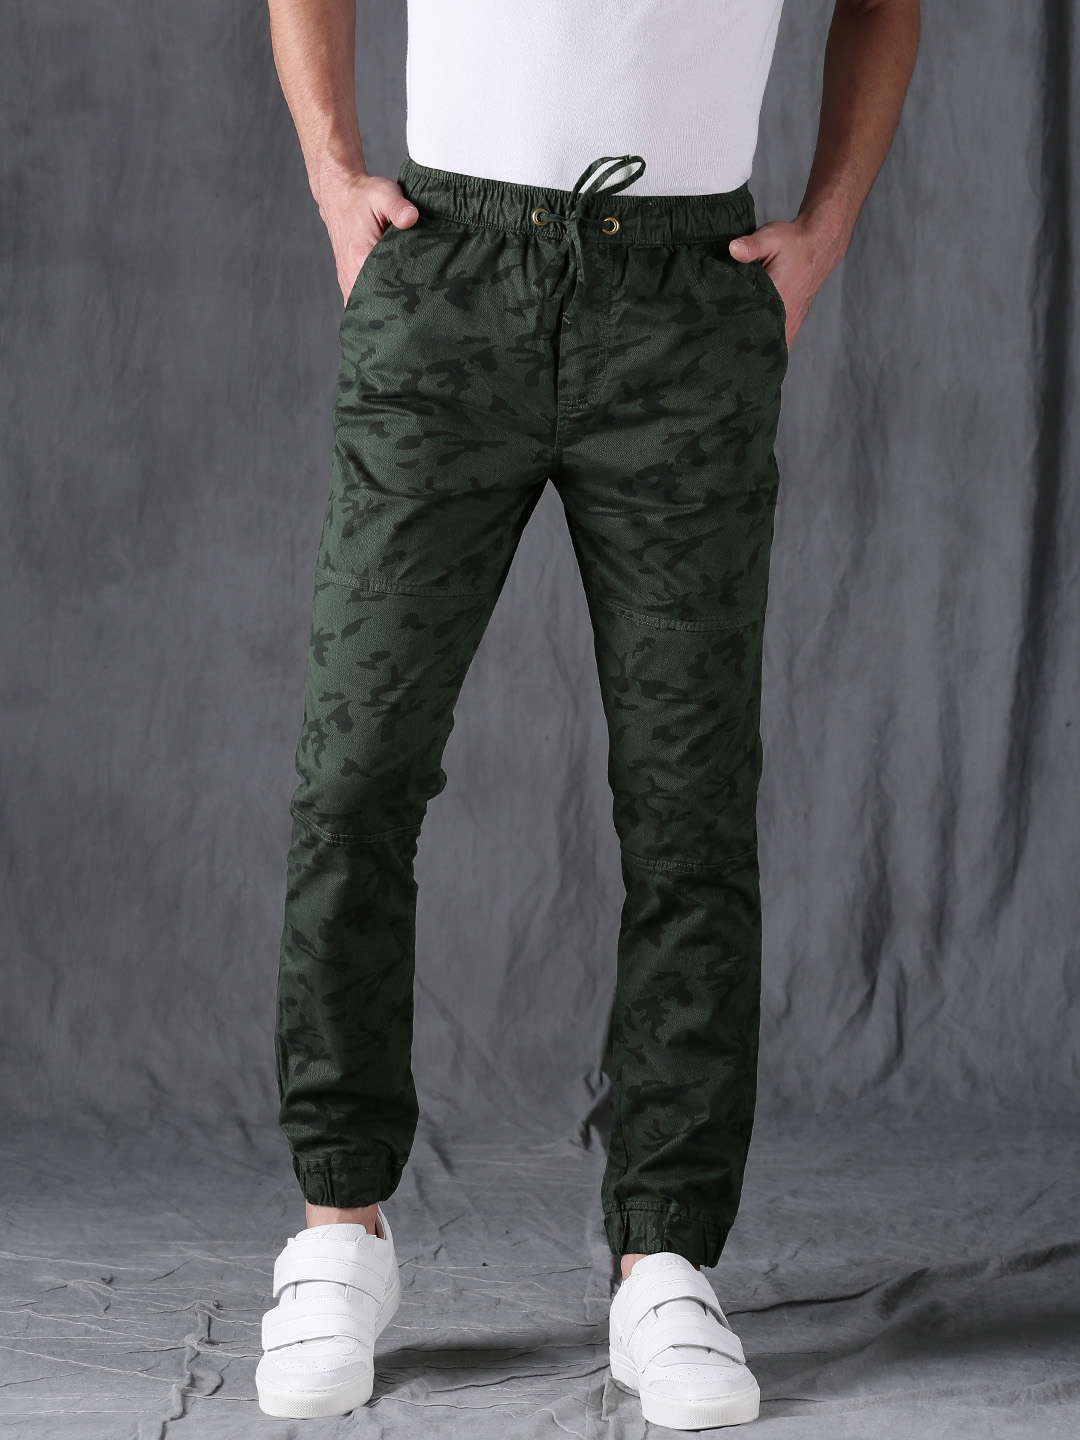 Latest IVOC Trousers arrivals  11 products  FASHIOLAin